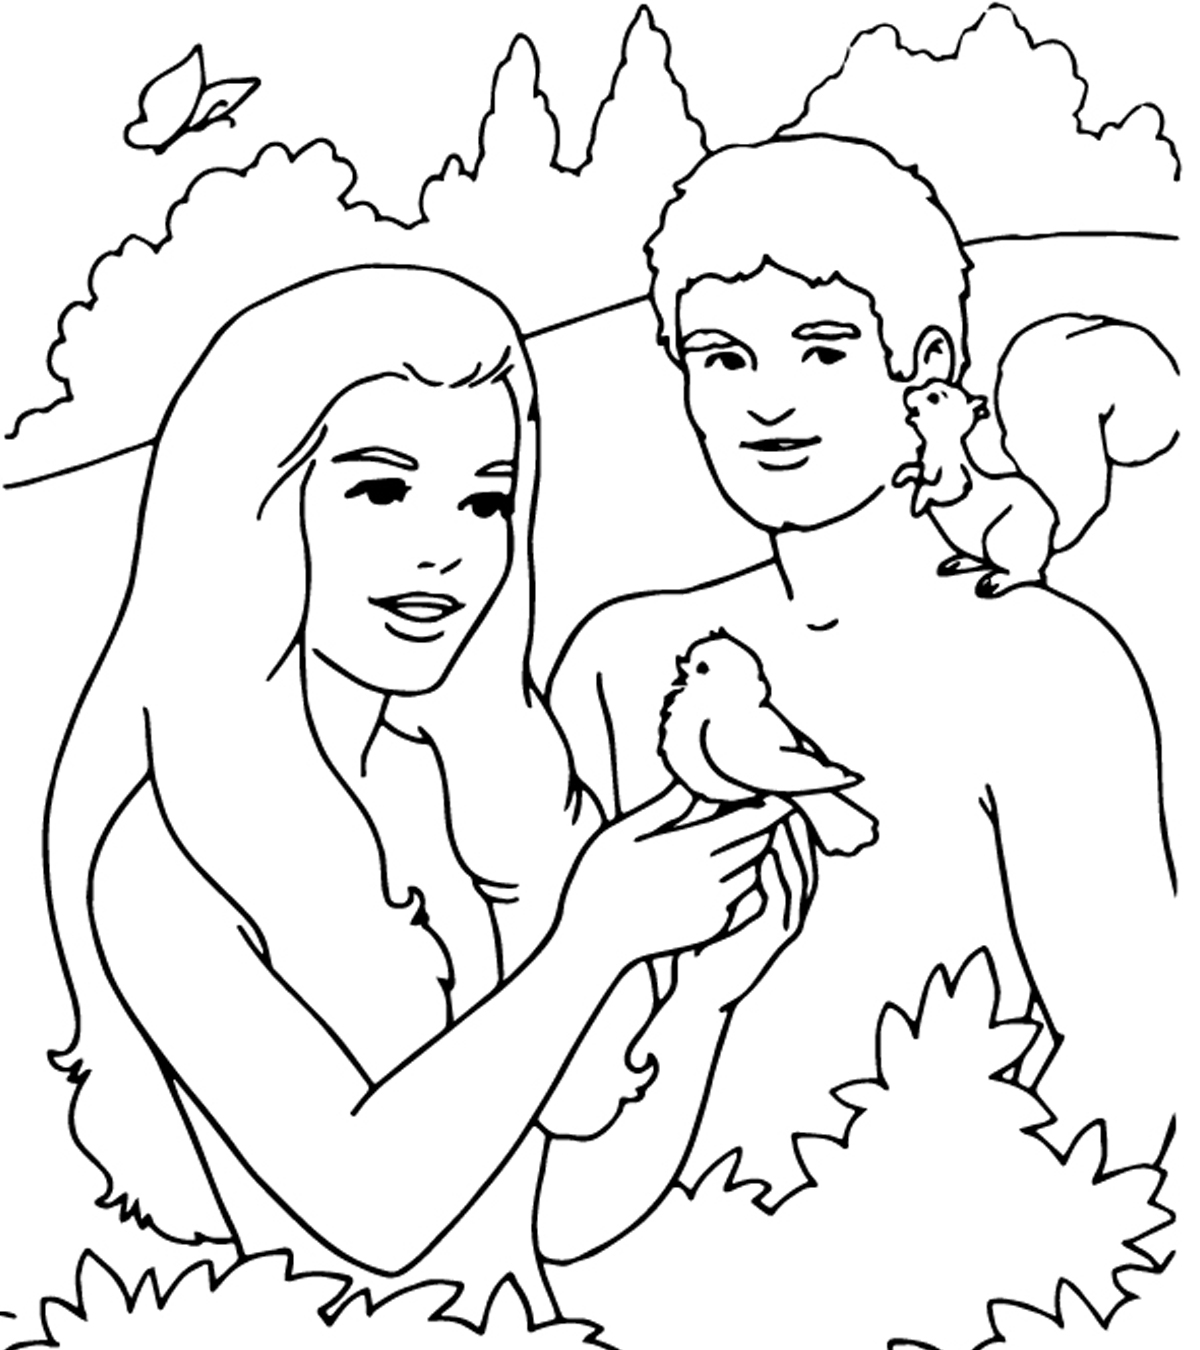 Top 25 Bible Stories Colouring Pages For Your Little Ones_image